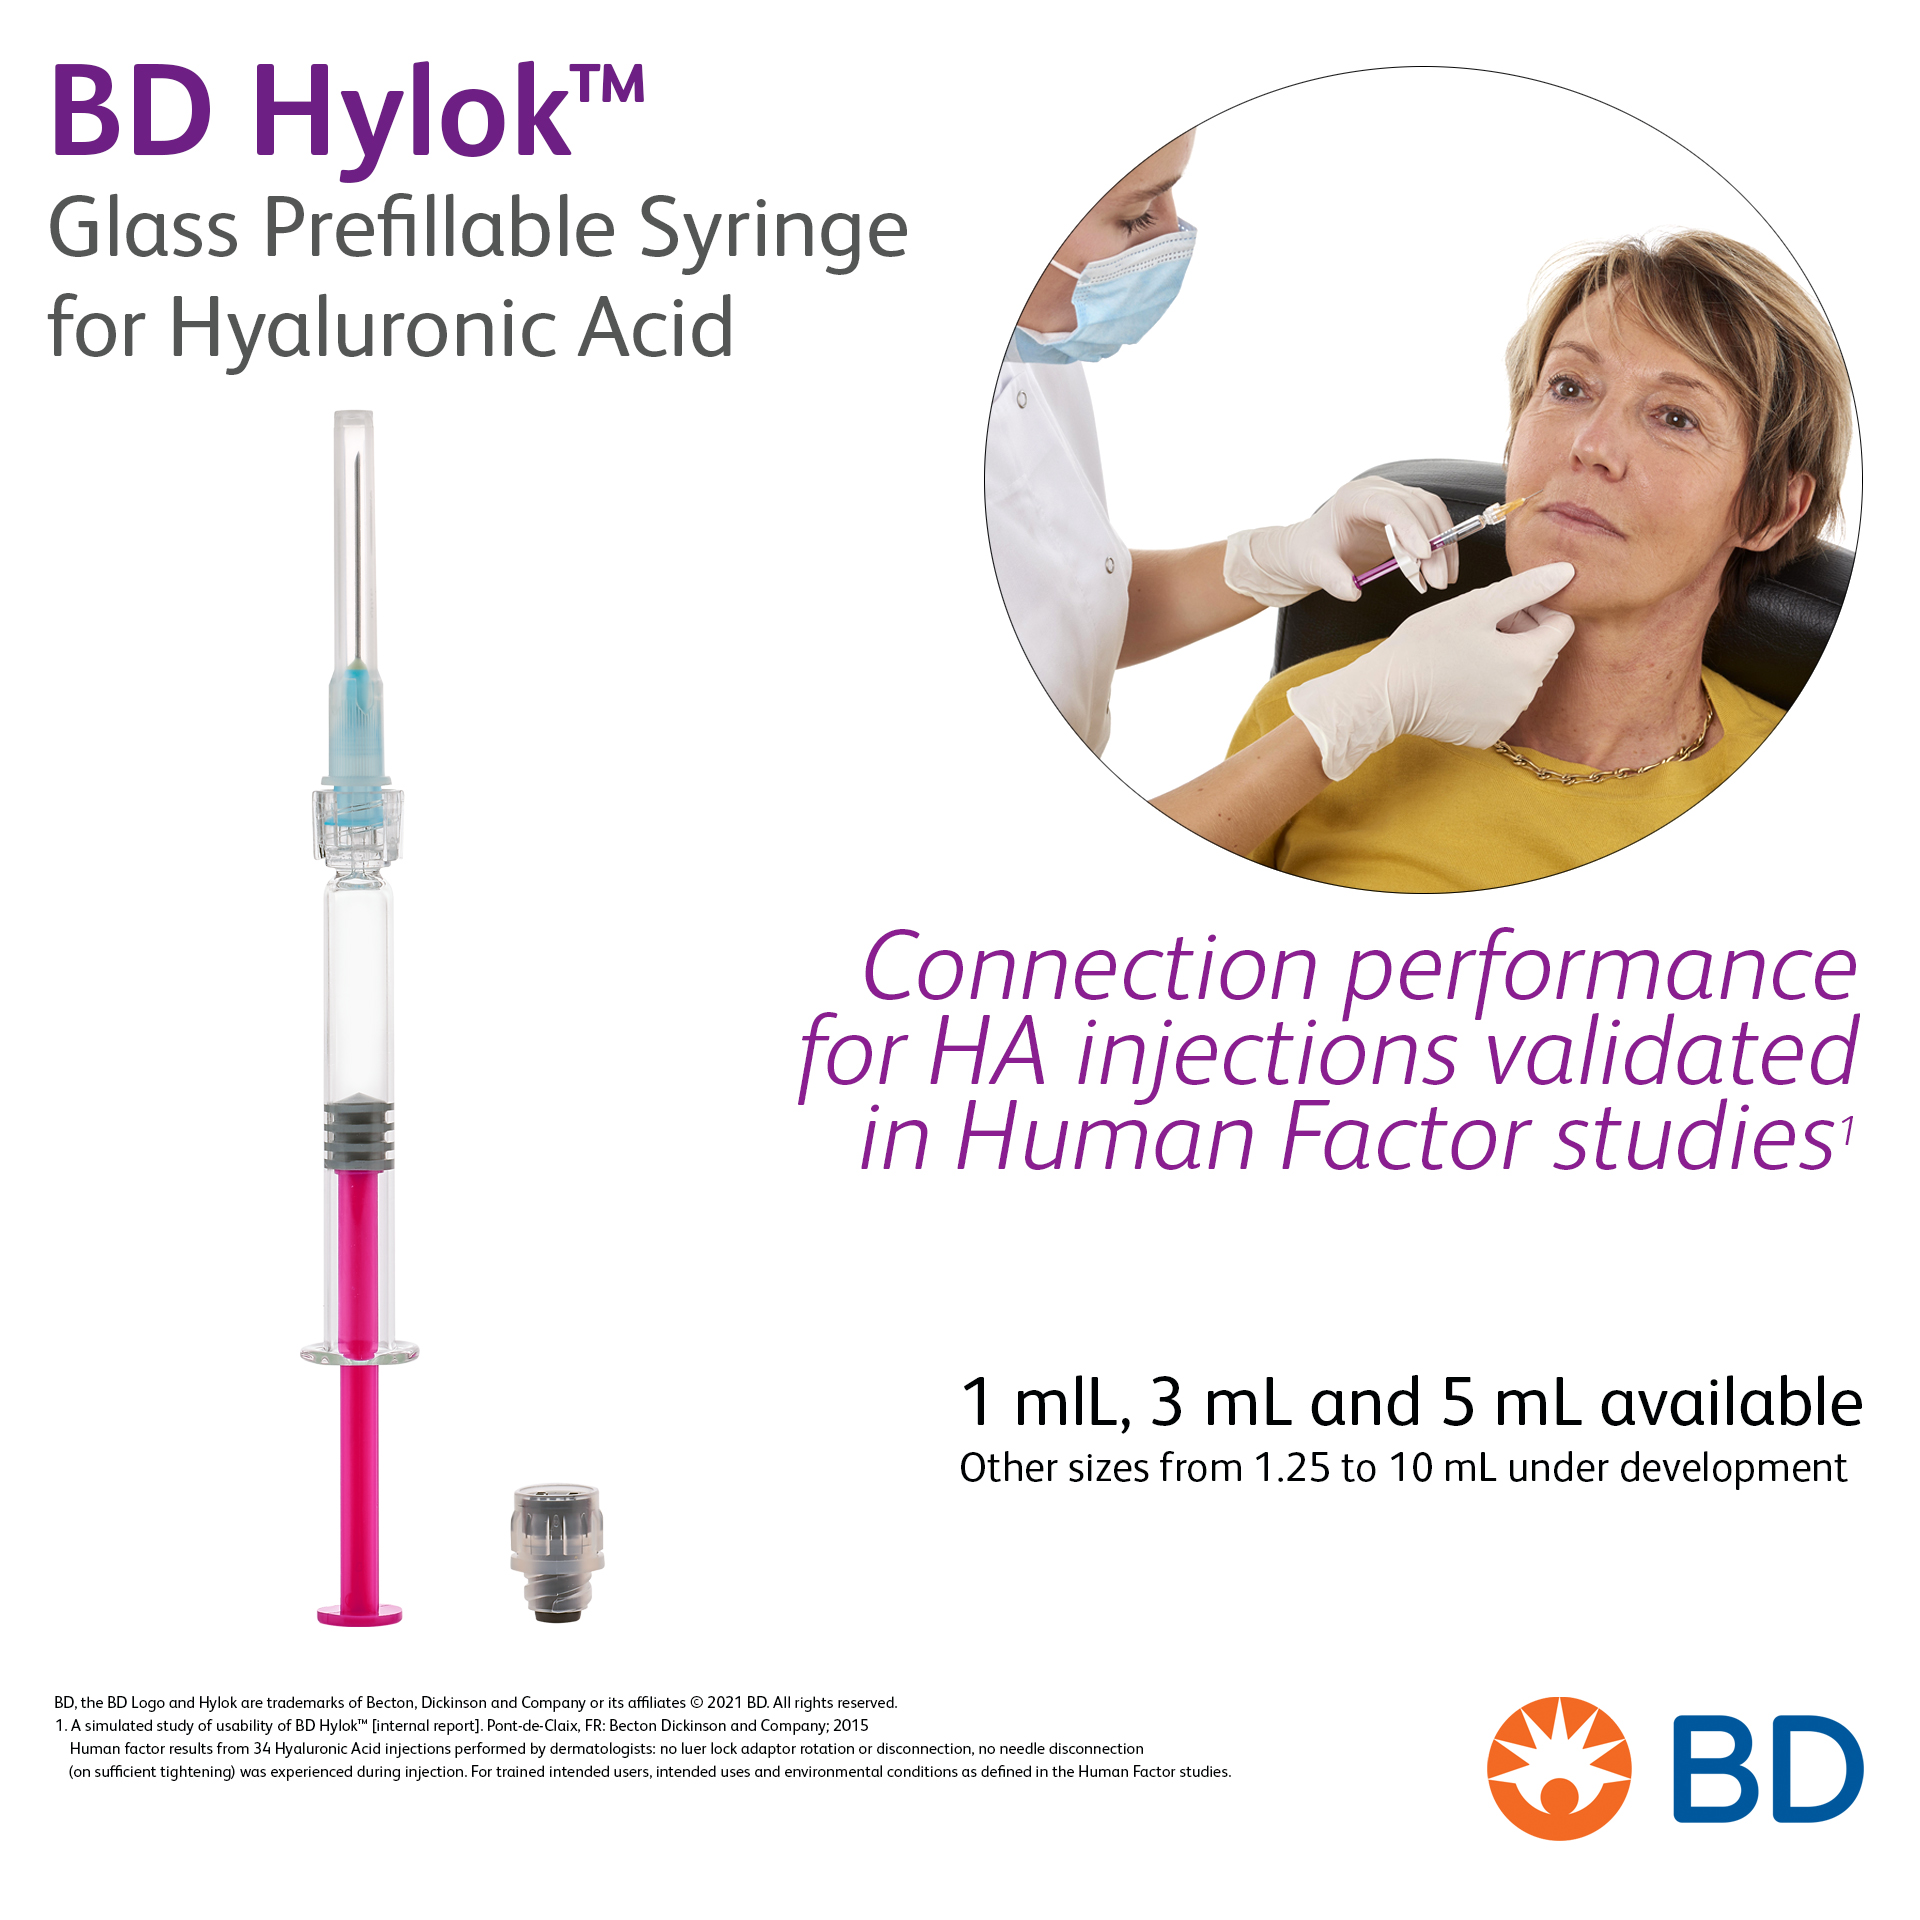 BD Hylok™ Glass Prefillable Syringe For Hyaluronic Acid - Connection performance for HA injections validated in Human Factor studies